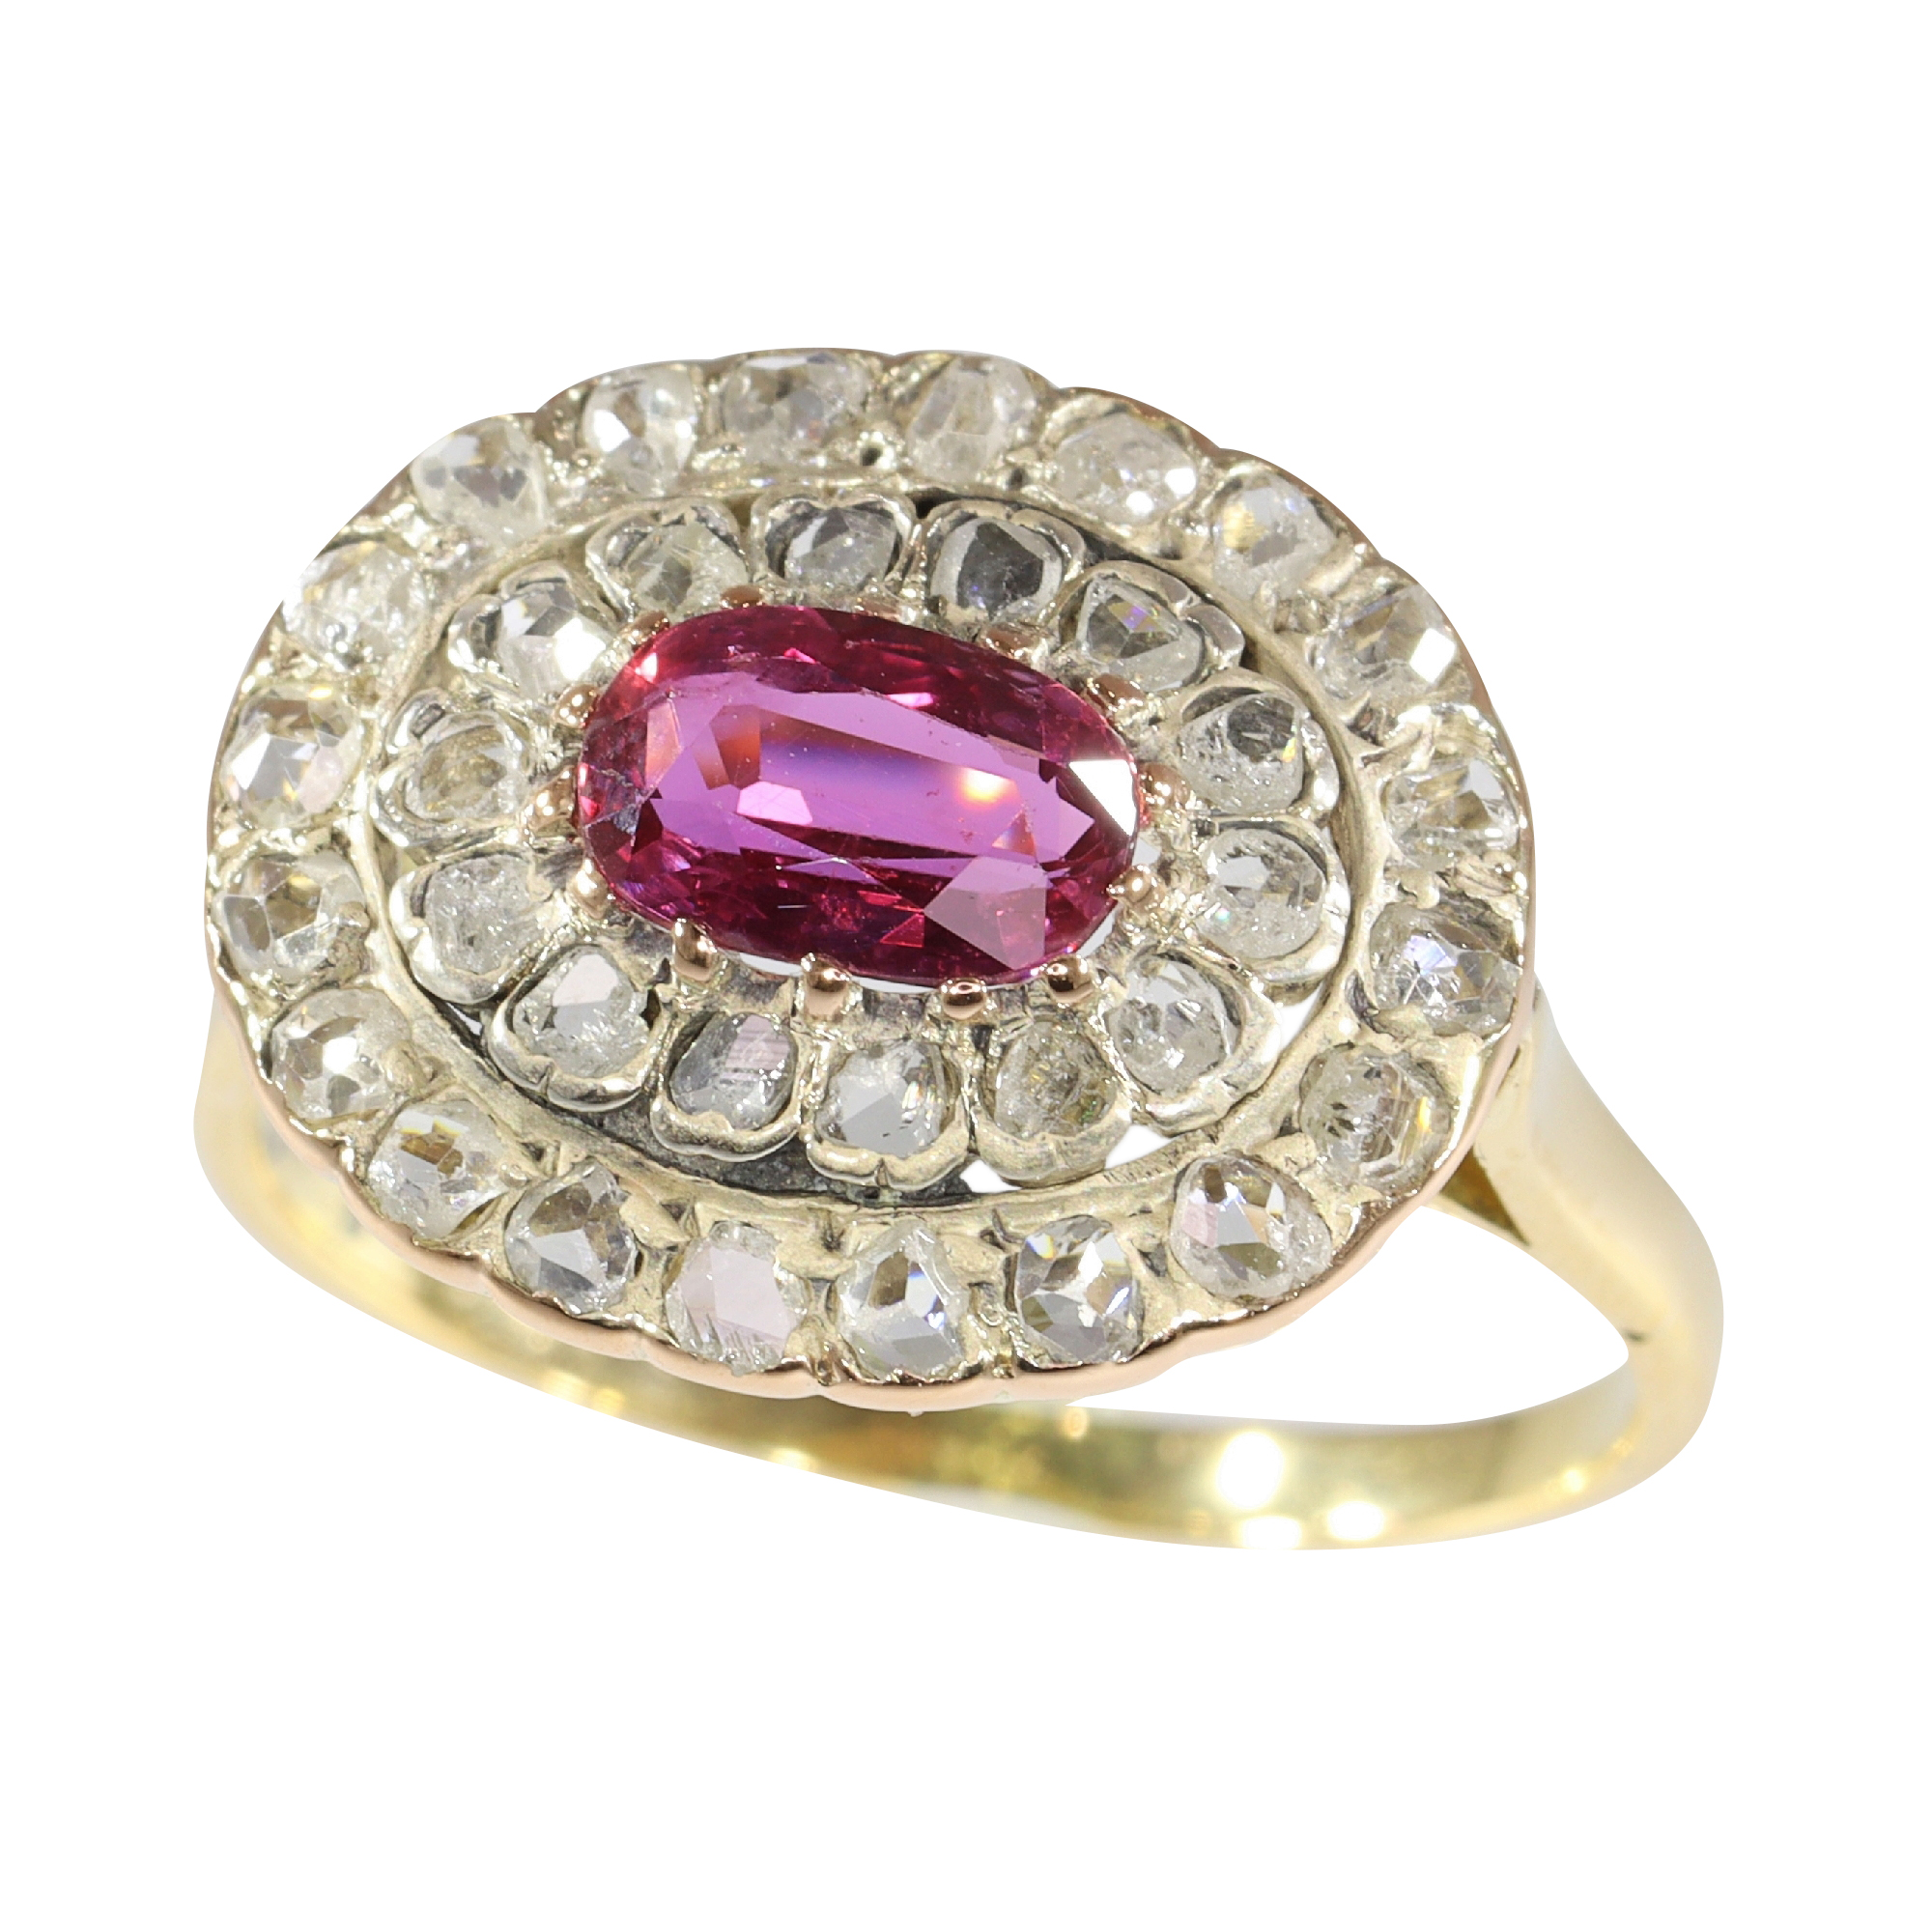 Delicate Beauty: Victorian Ring with Pink Purplish Tourmaline